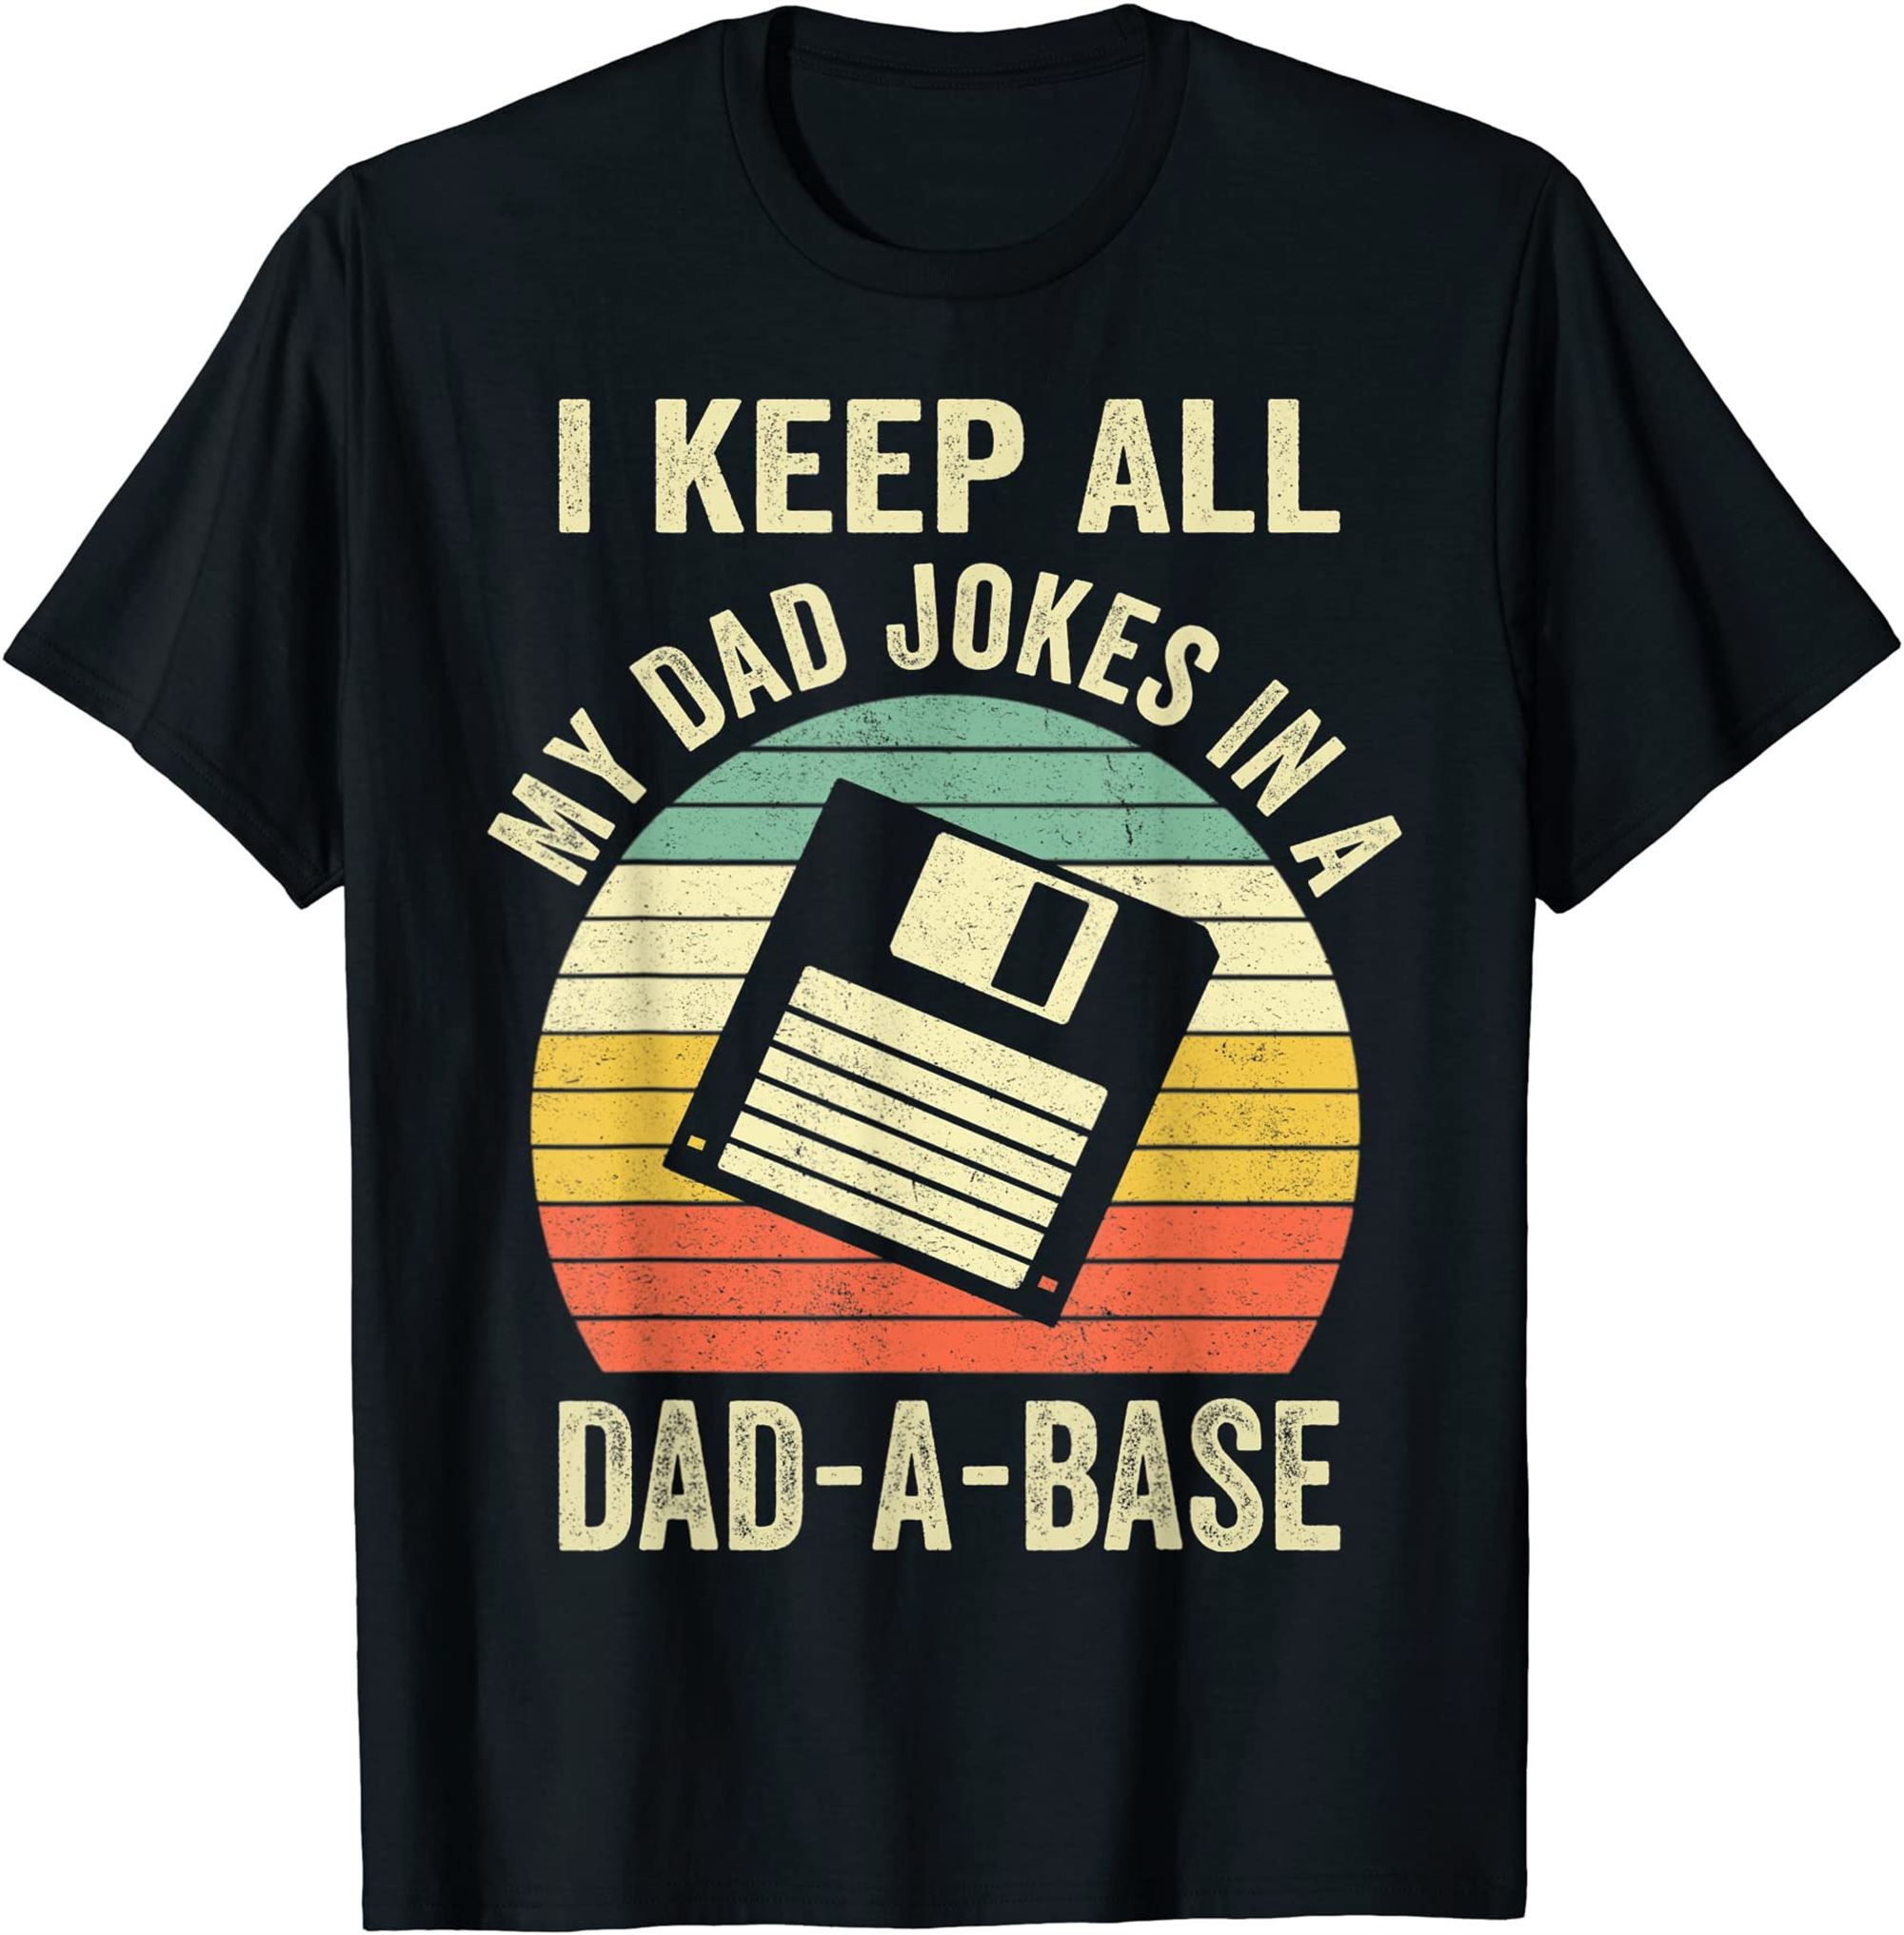 Fathers Day Shirts For Dad Jokes Funny Dad Shirts For Men T-shirt Size Up To 5xl